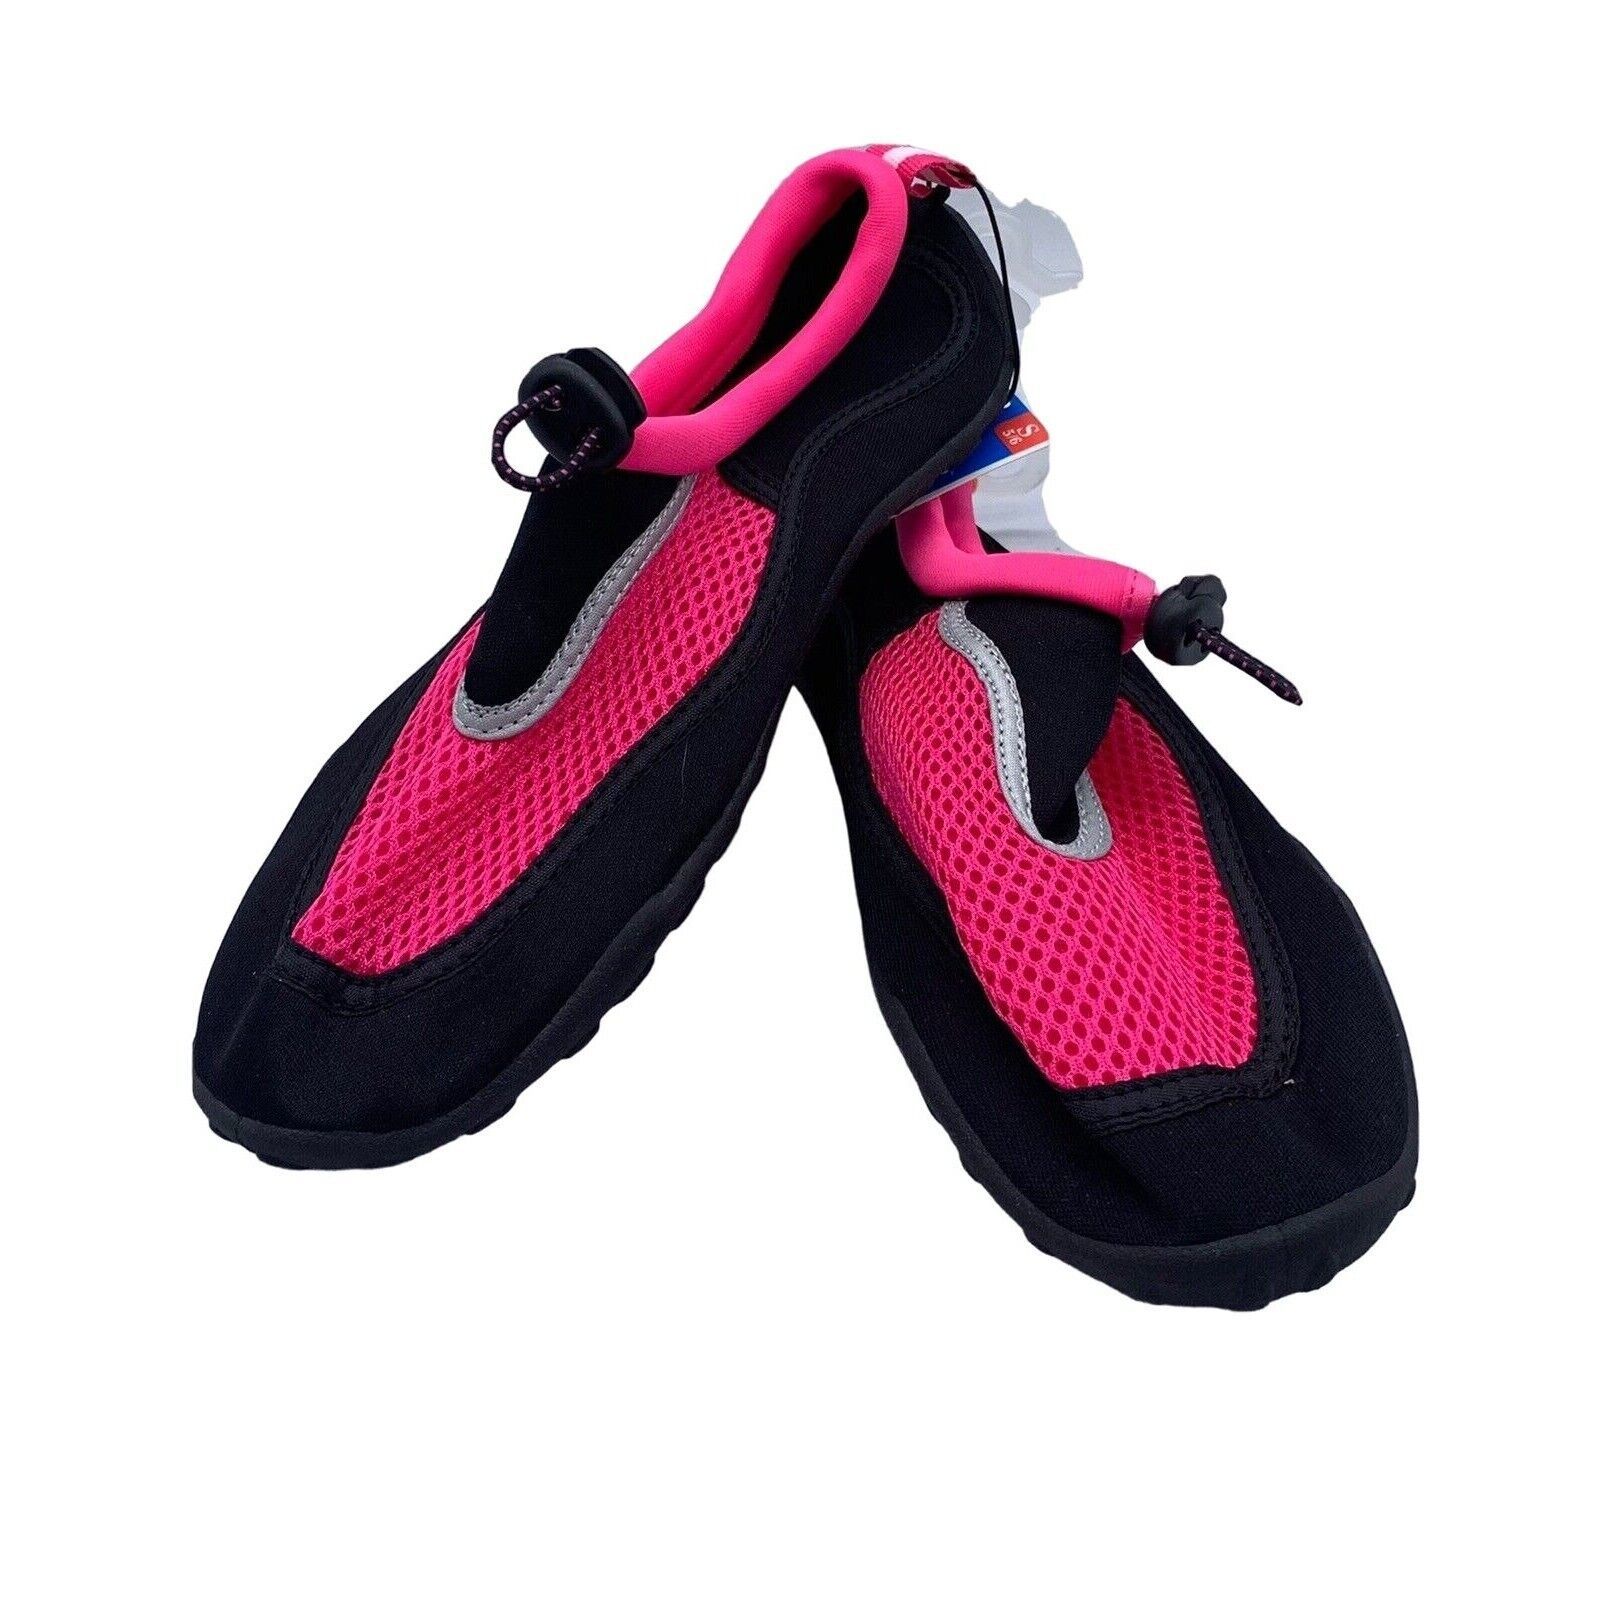 Primary image for West Loop Mesh Womens Small Sz 5/6 Pink Black Water Boat Shoes Boating Swimming